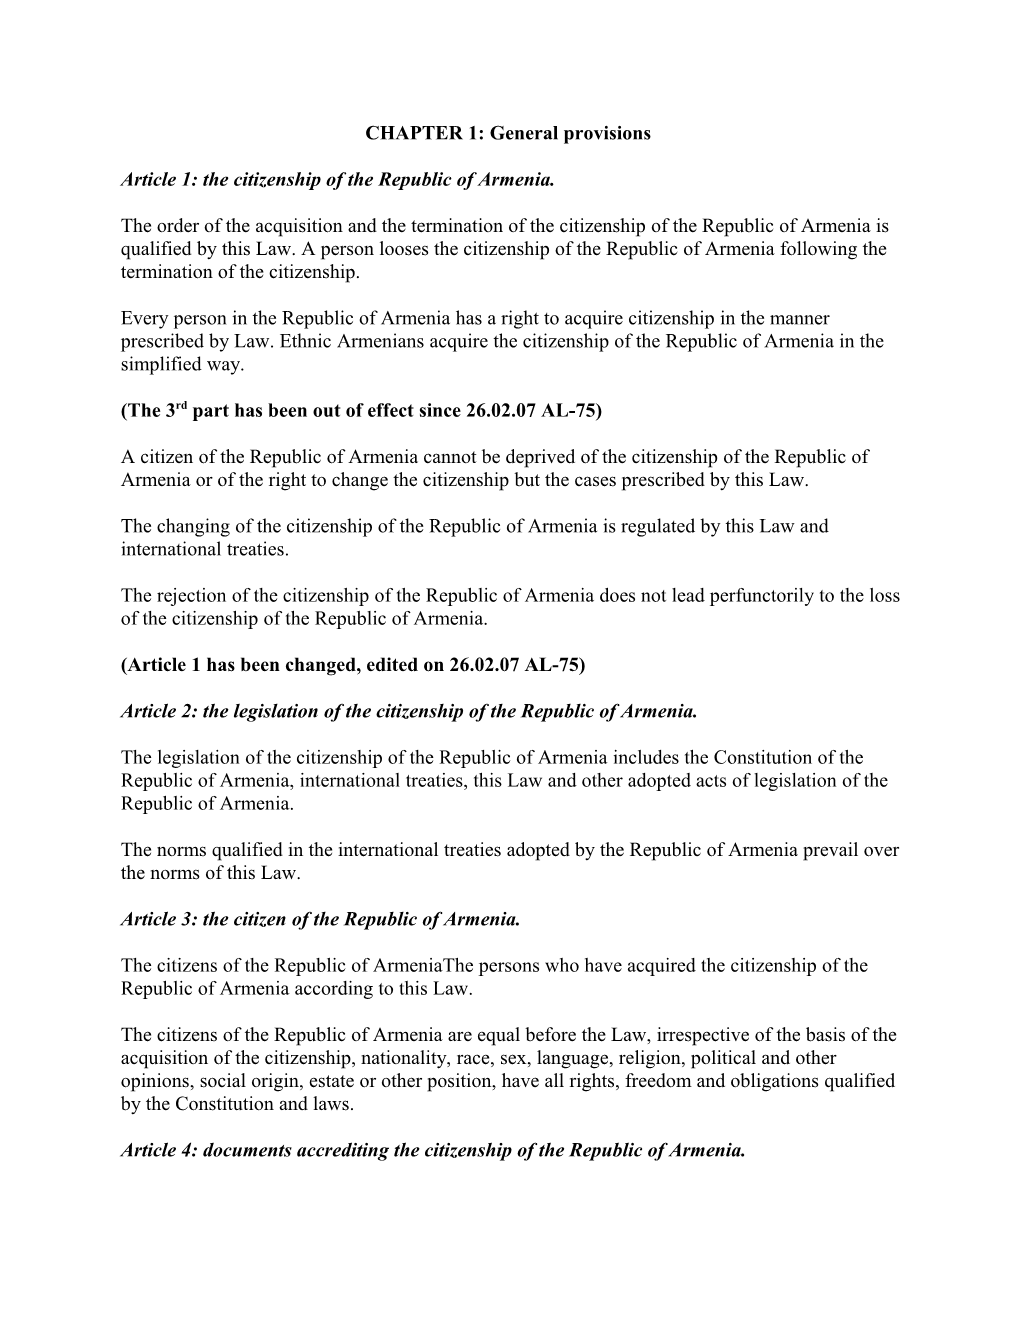 Article 1: the Citizenship of the Republic of Armenia